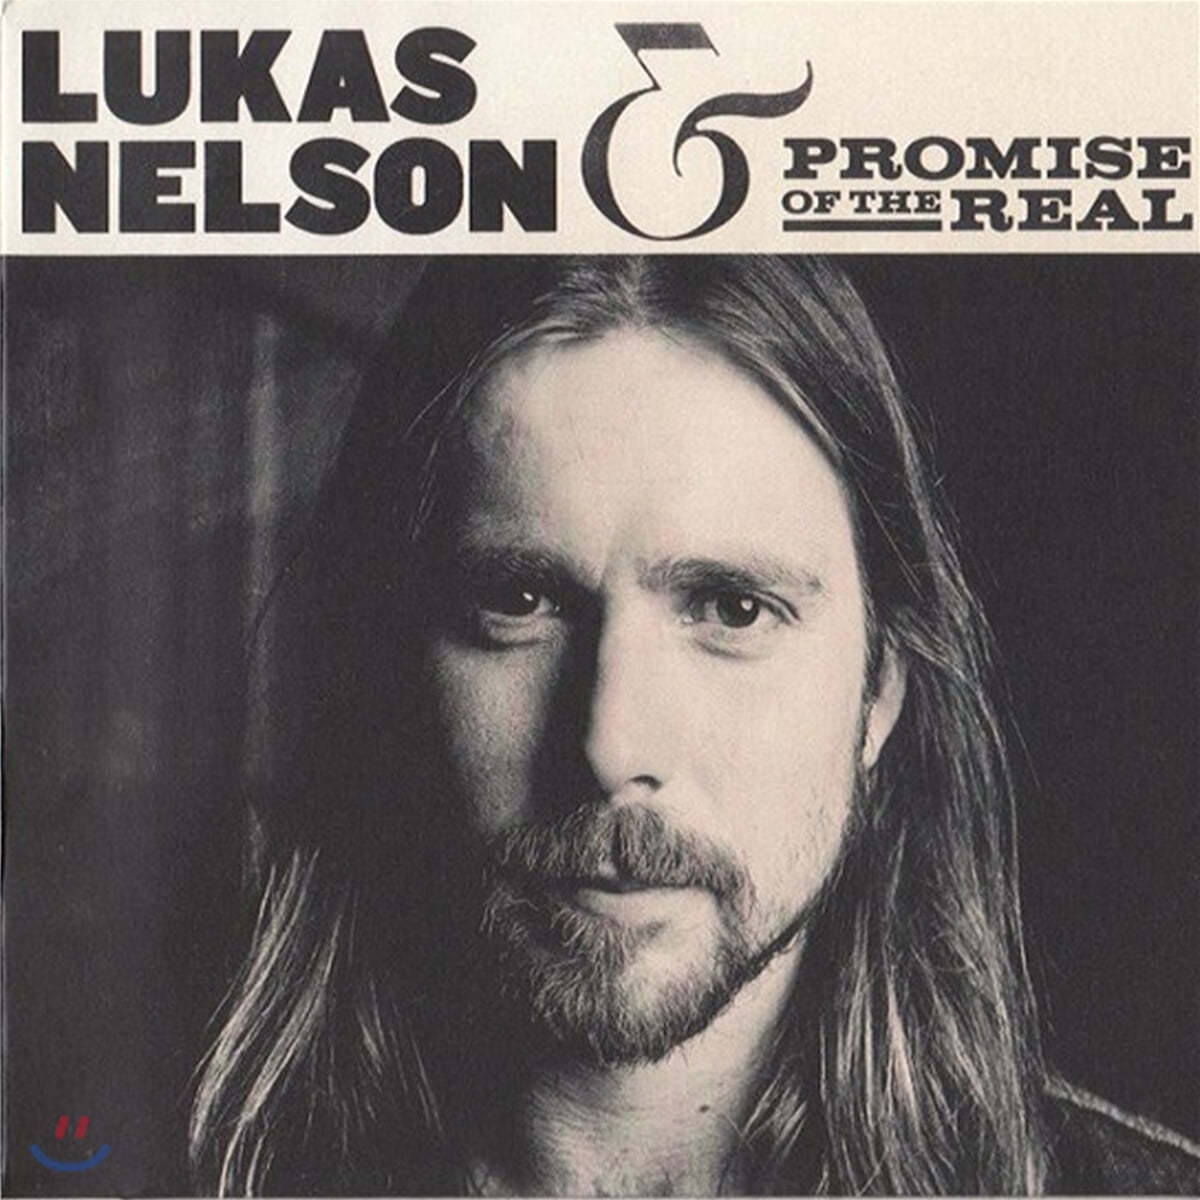 Lukas Nelson &amp; Promise of the Real (루카스 넬슨 앤 프로미스 오브 더 리얼) - Lukas Nelson &amp; Promise of the Real